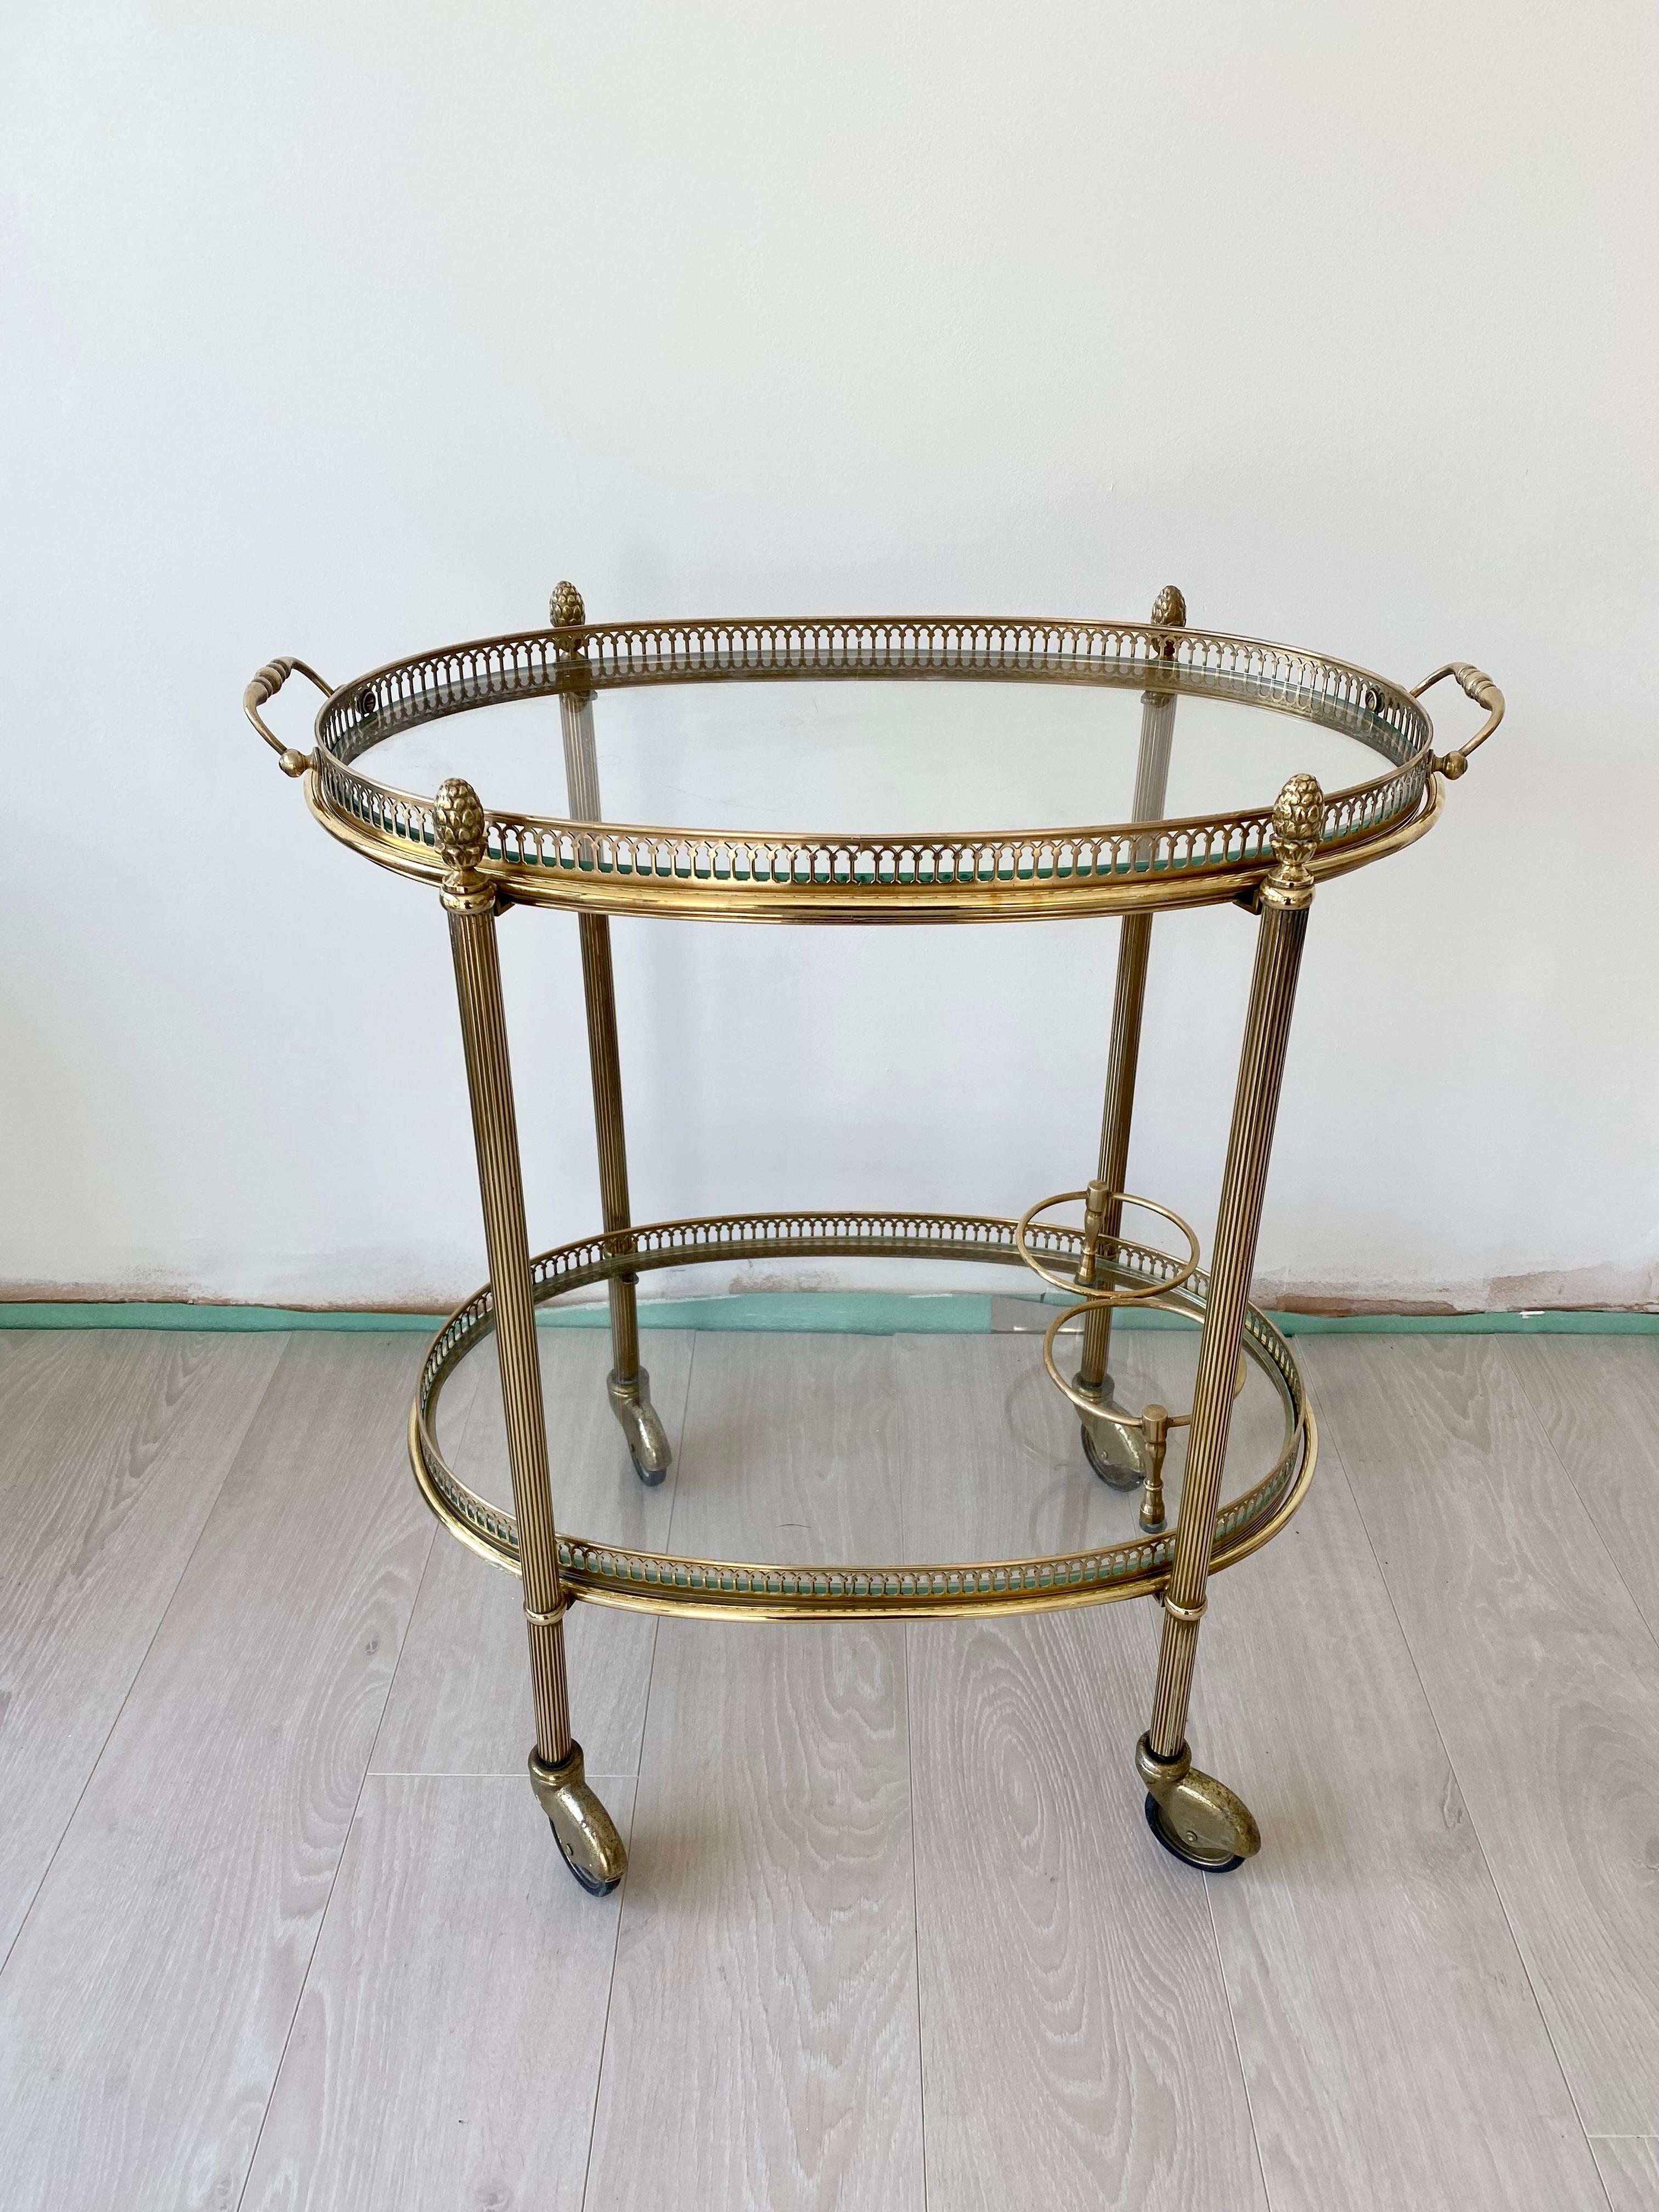 Mid-20th Century Vintage French Brass Cocktail Drinks Trolley Bar Cart